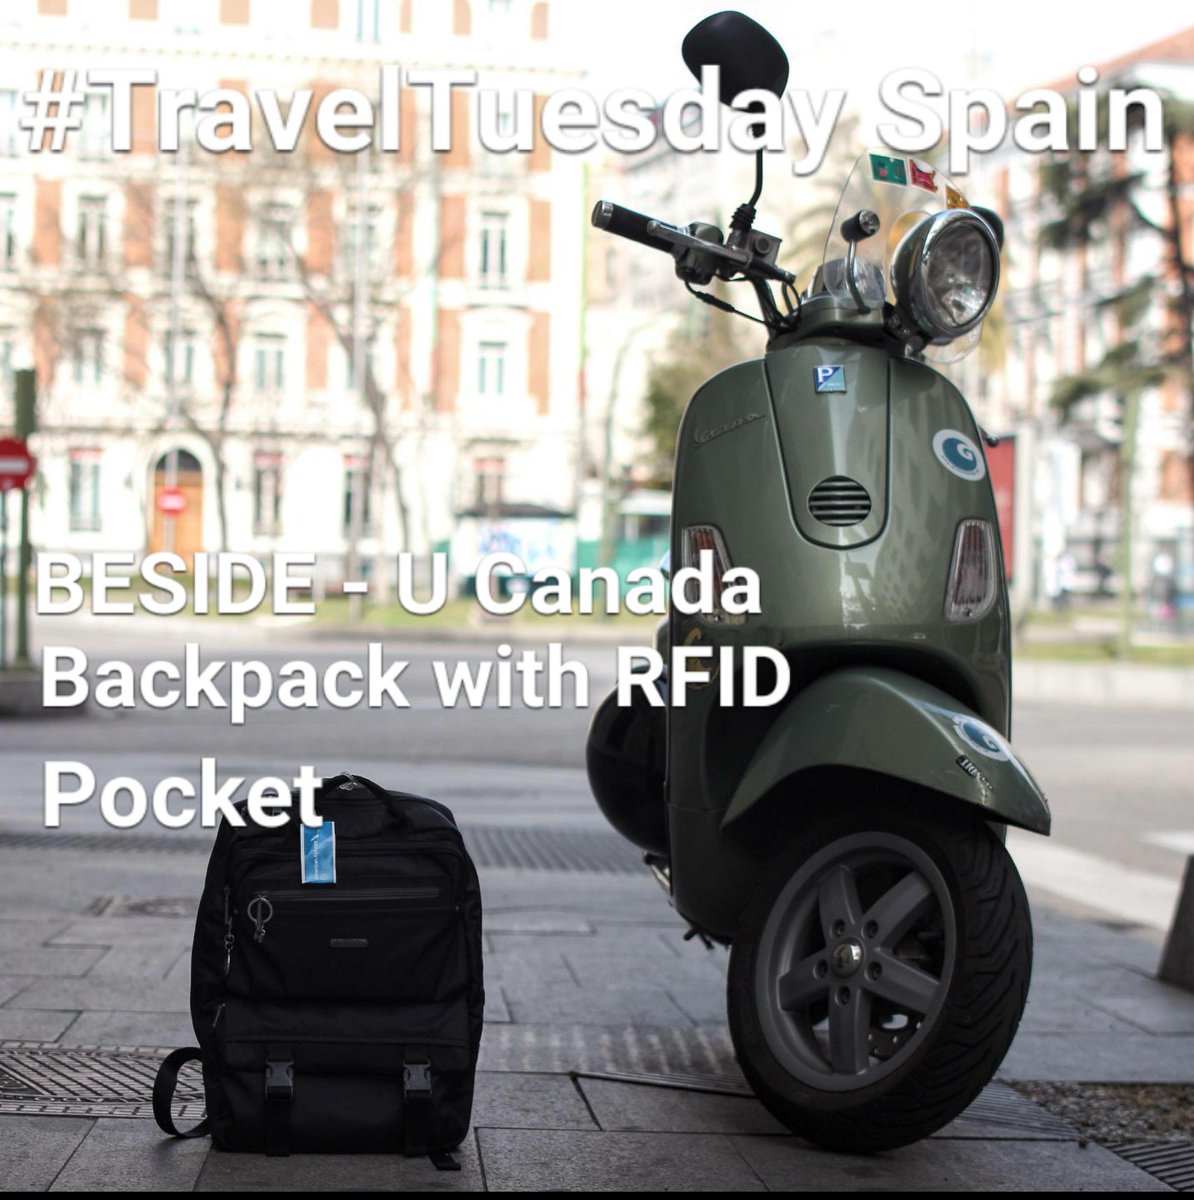 #TravelTuesday #Spain @BesideU_Canada backpack with #RFID guarded pocket. #travel #styleandfunction